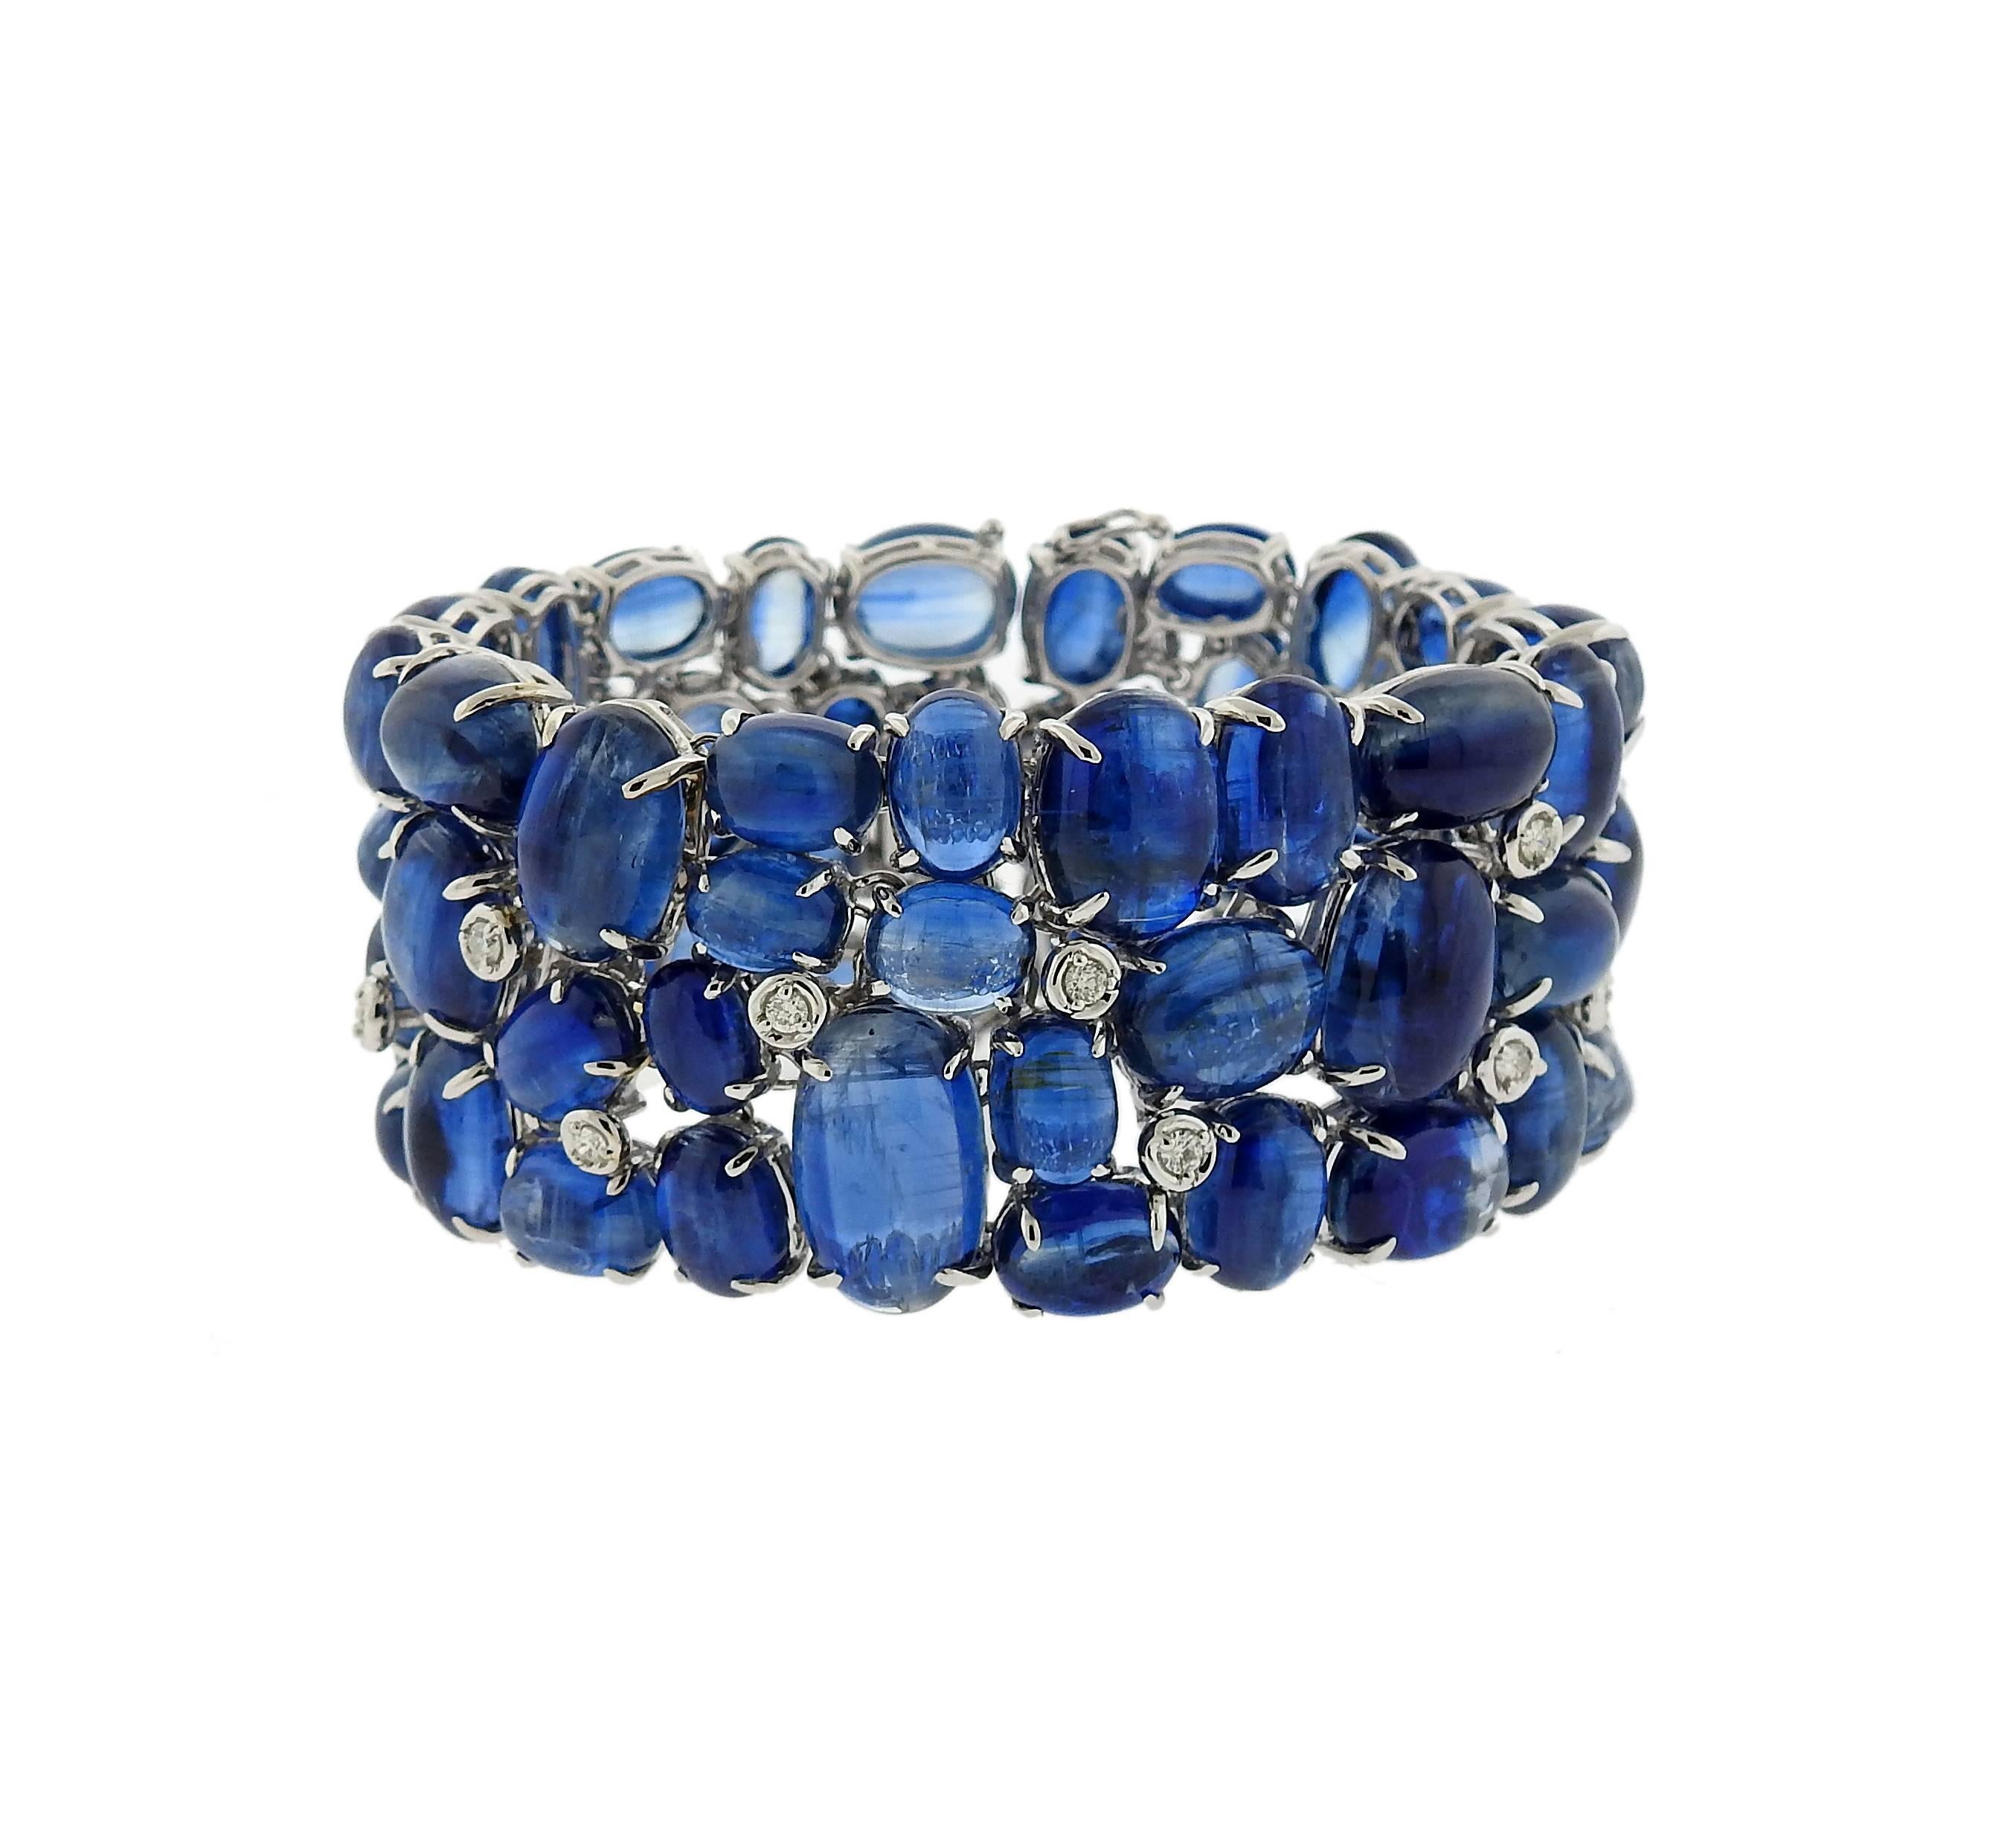 18k white gold bracelet, featuring kyanite cabochons,adorned with approximately 0.80ctw in diamonds. Bracelet is 6 7/8" long and 31mm wide . Marked: 750, 18k. Weight of the piece - 117.2 grams 